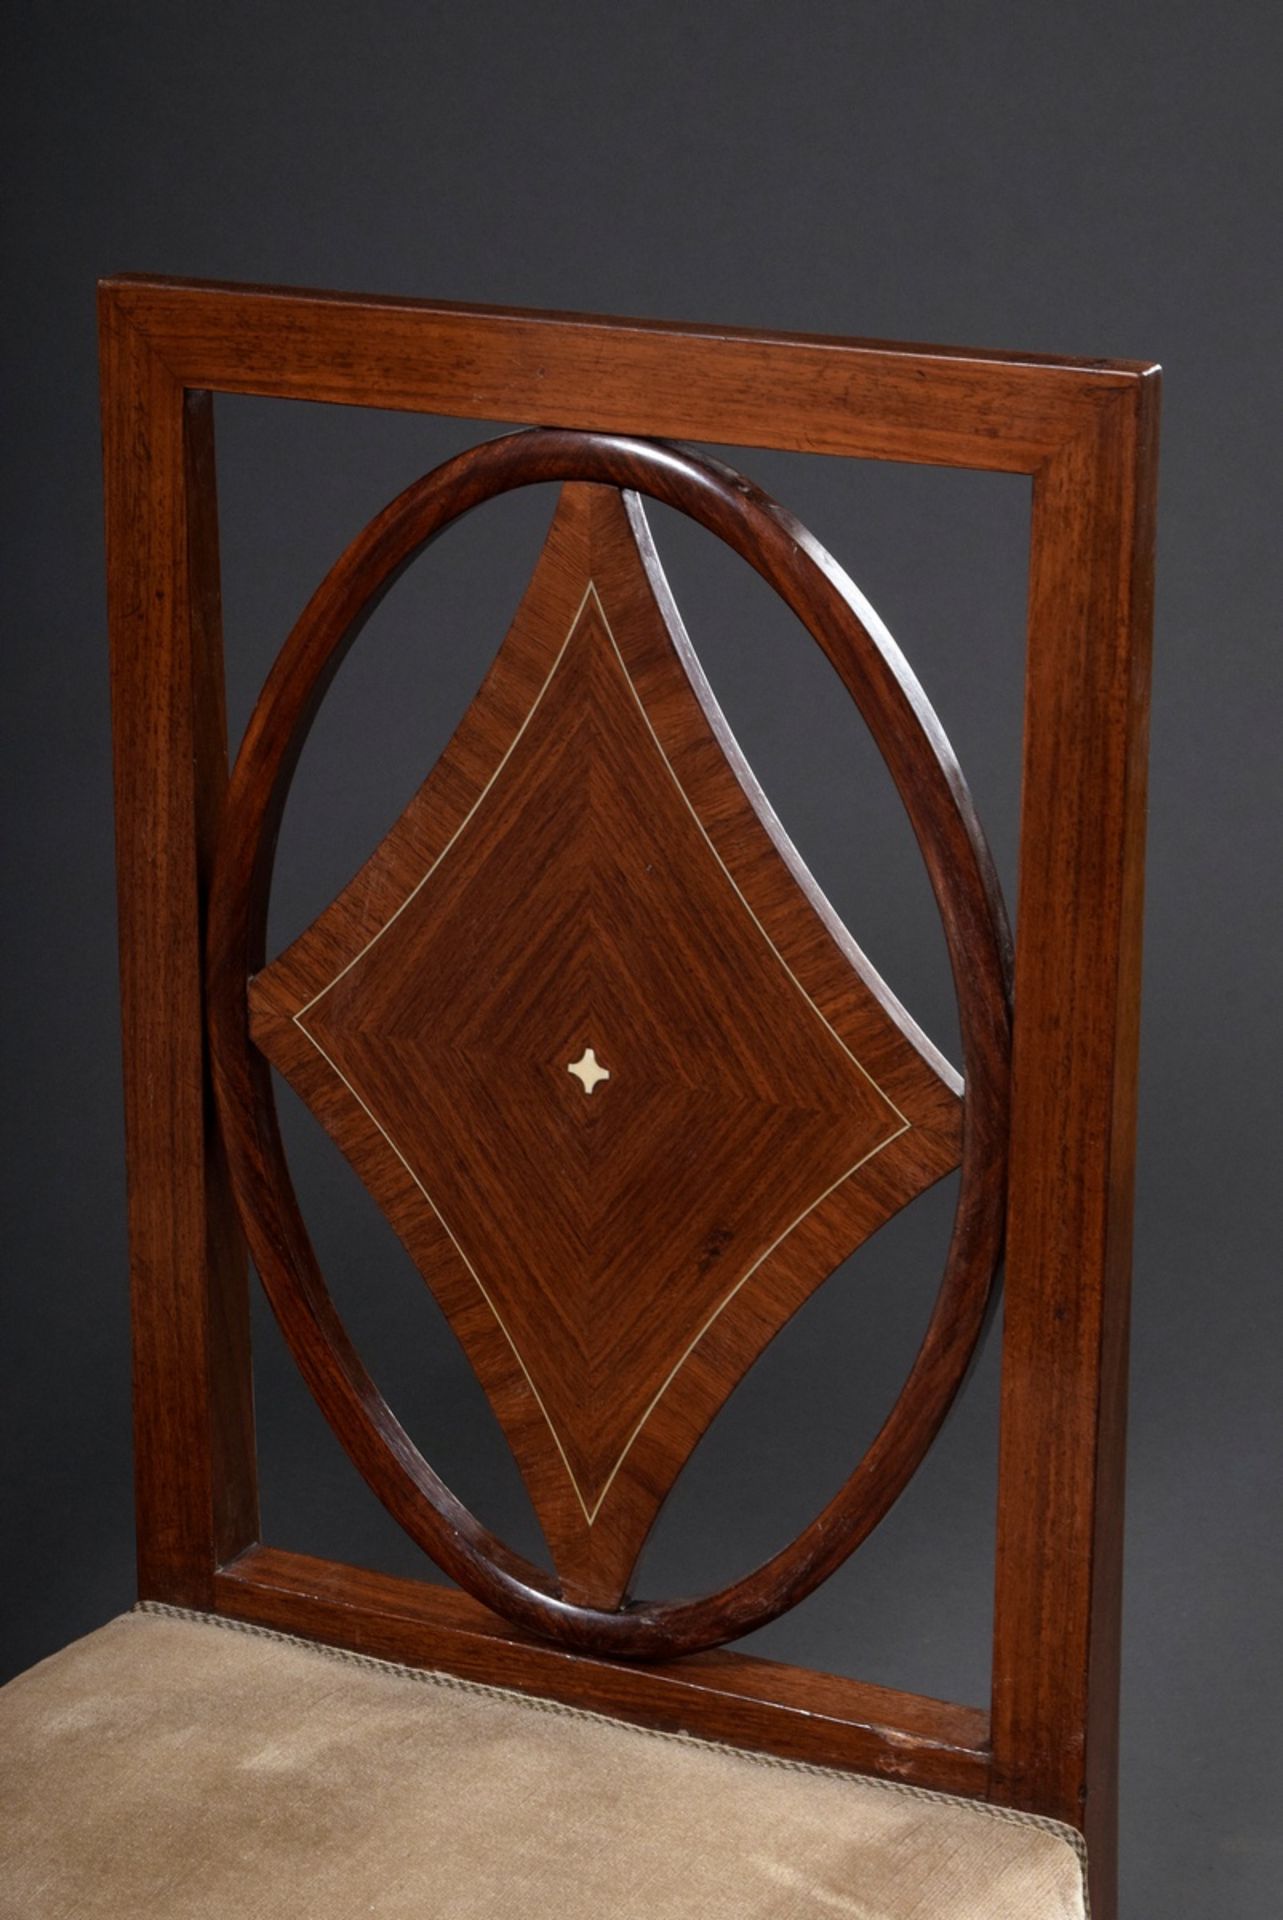 2 Art Deco chairs with oval framing and diamond motif in the backrest, Bruno Paul circle, rosewood  - Image 3 of 6